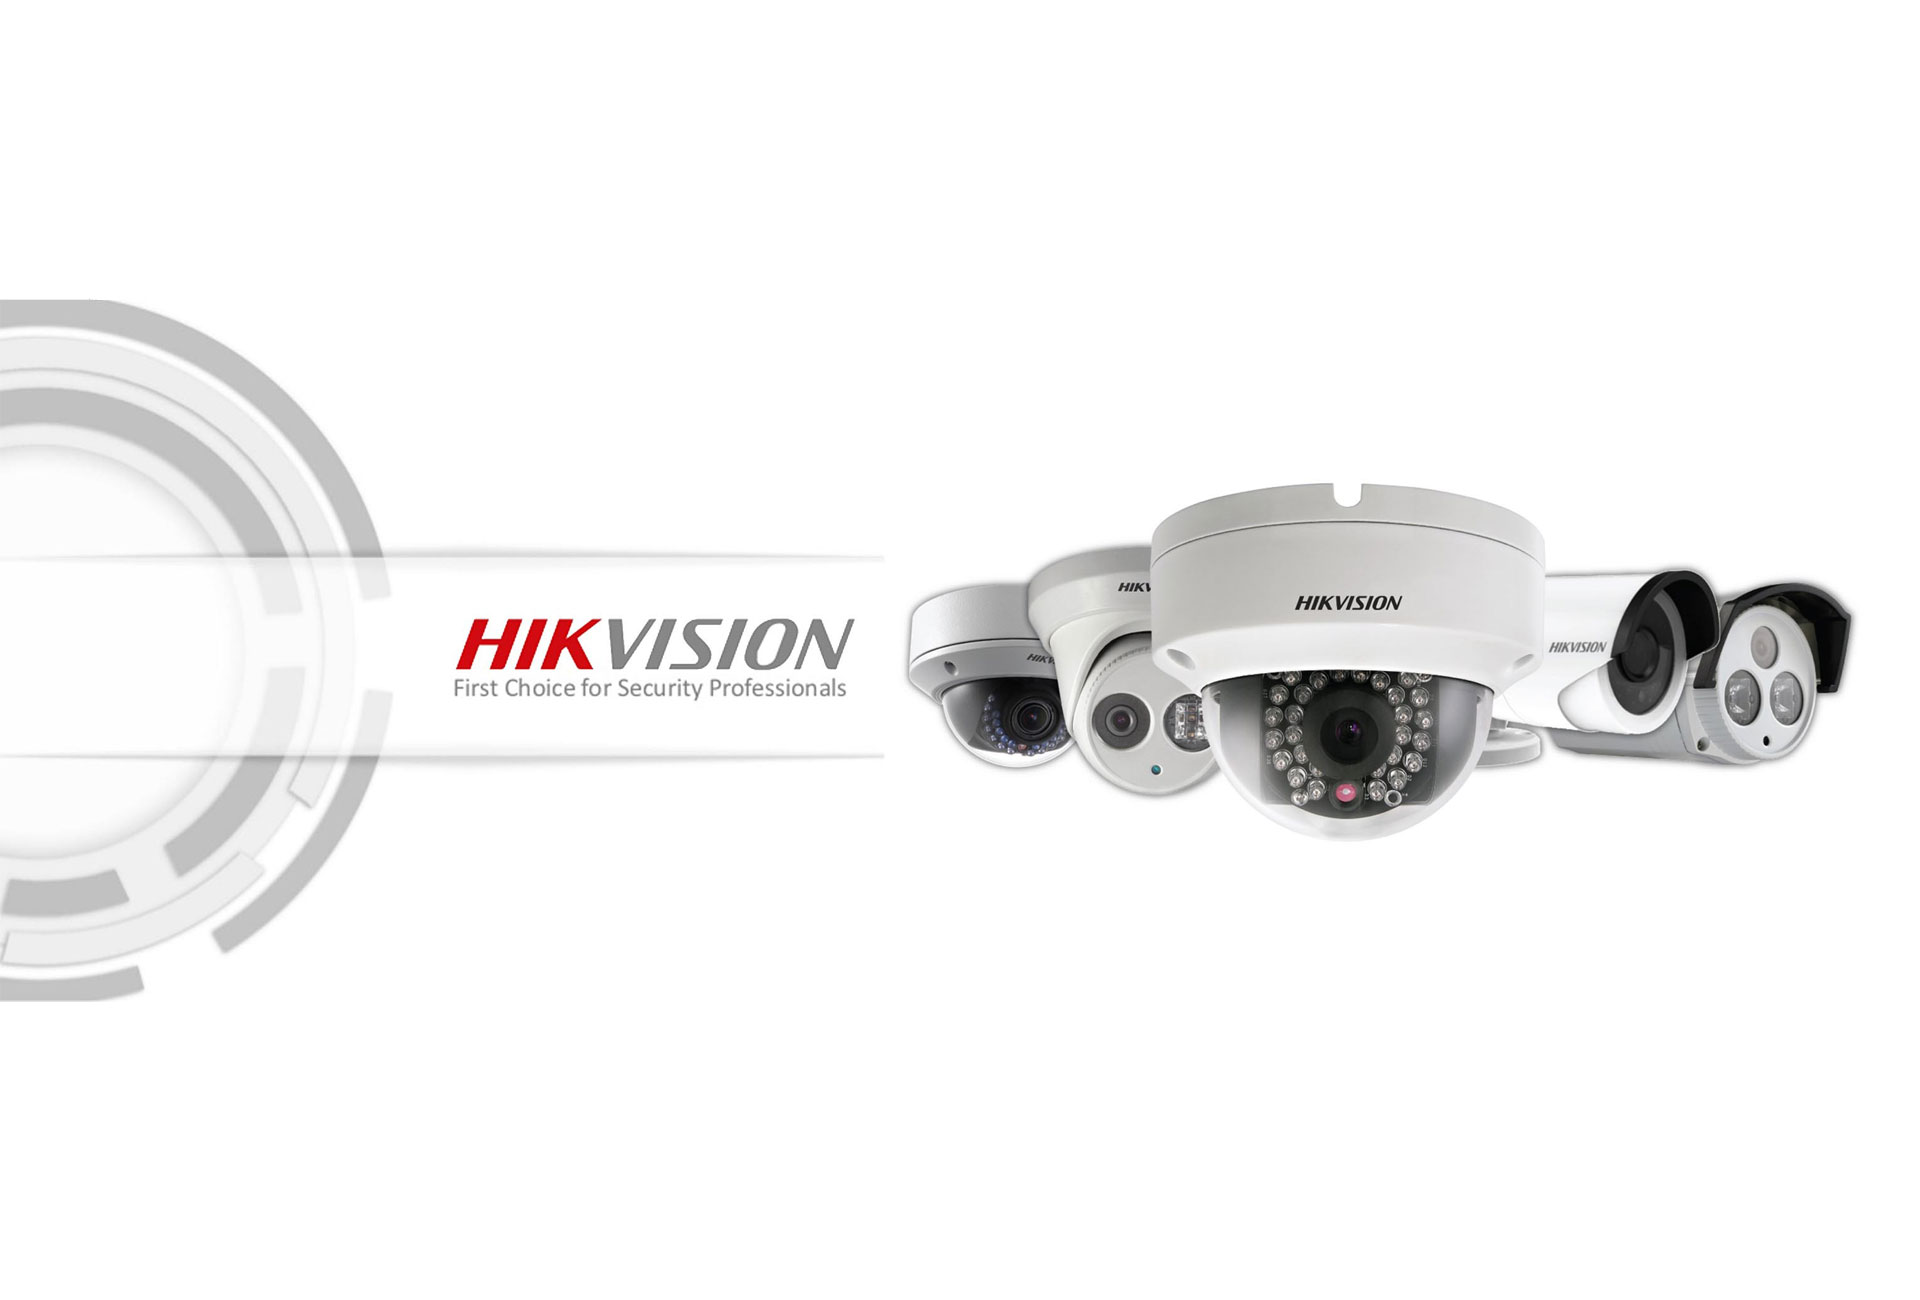 hd cctv and ptz camera for home in delhi